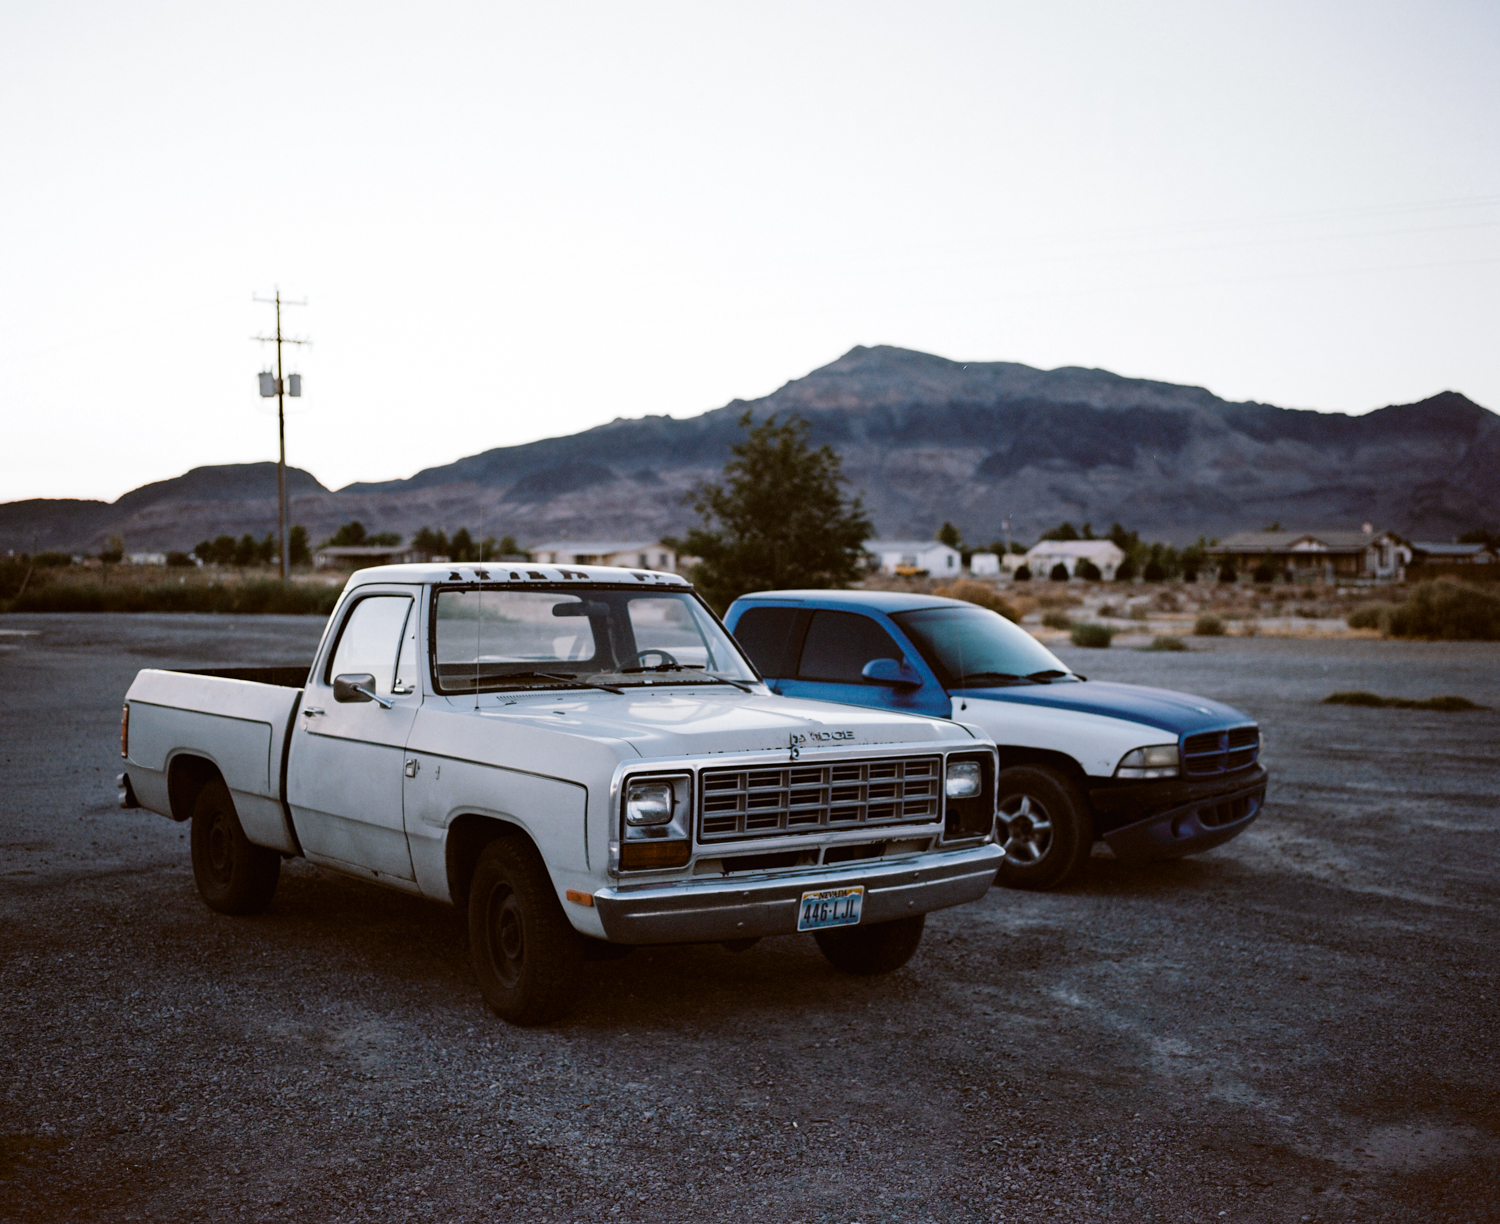  Shadow Mountain, NV. August 2015. 